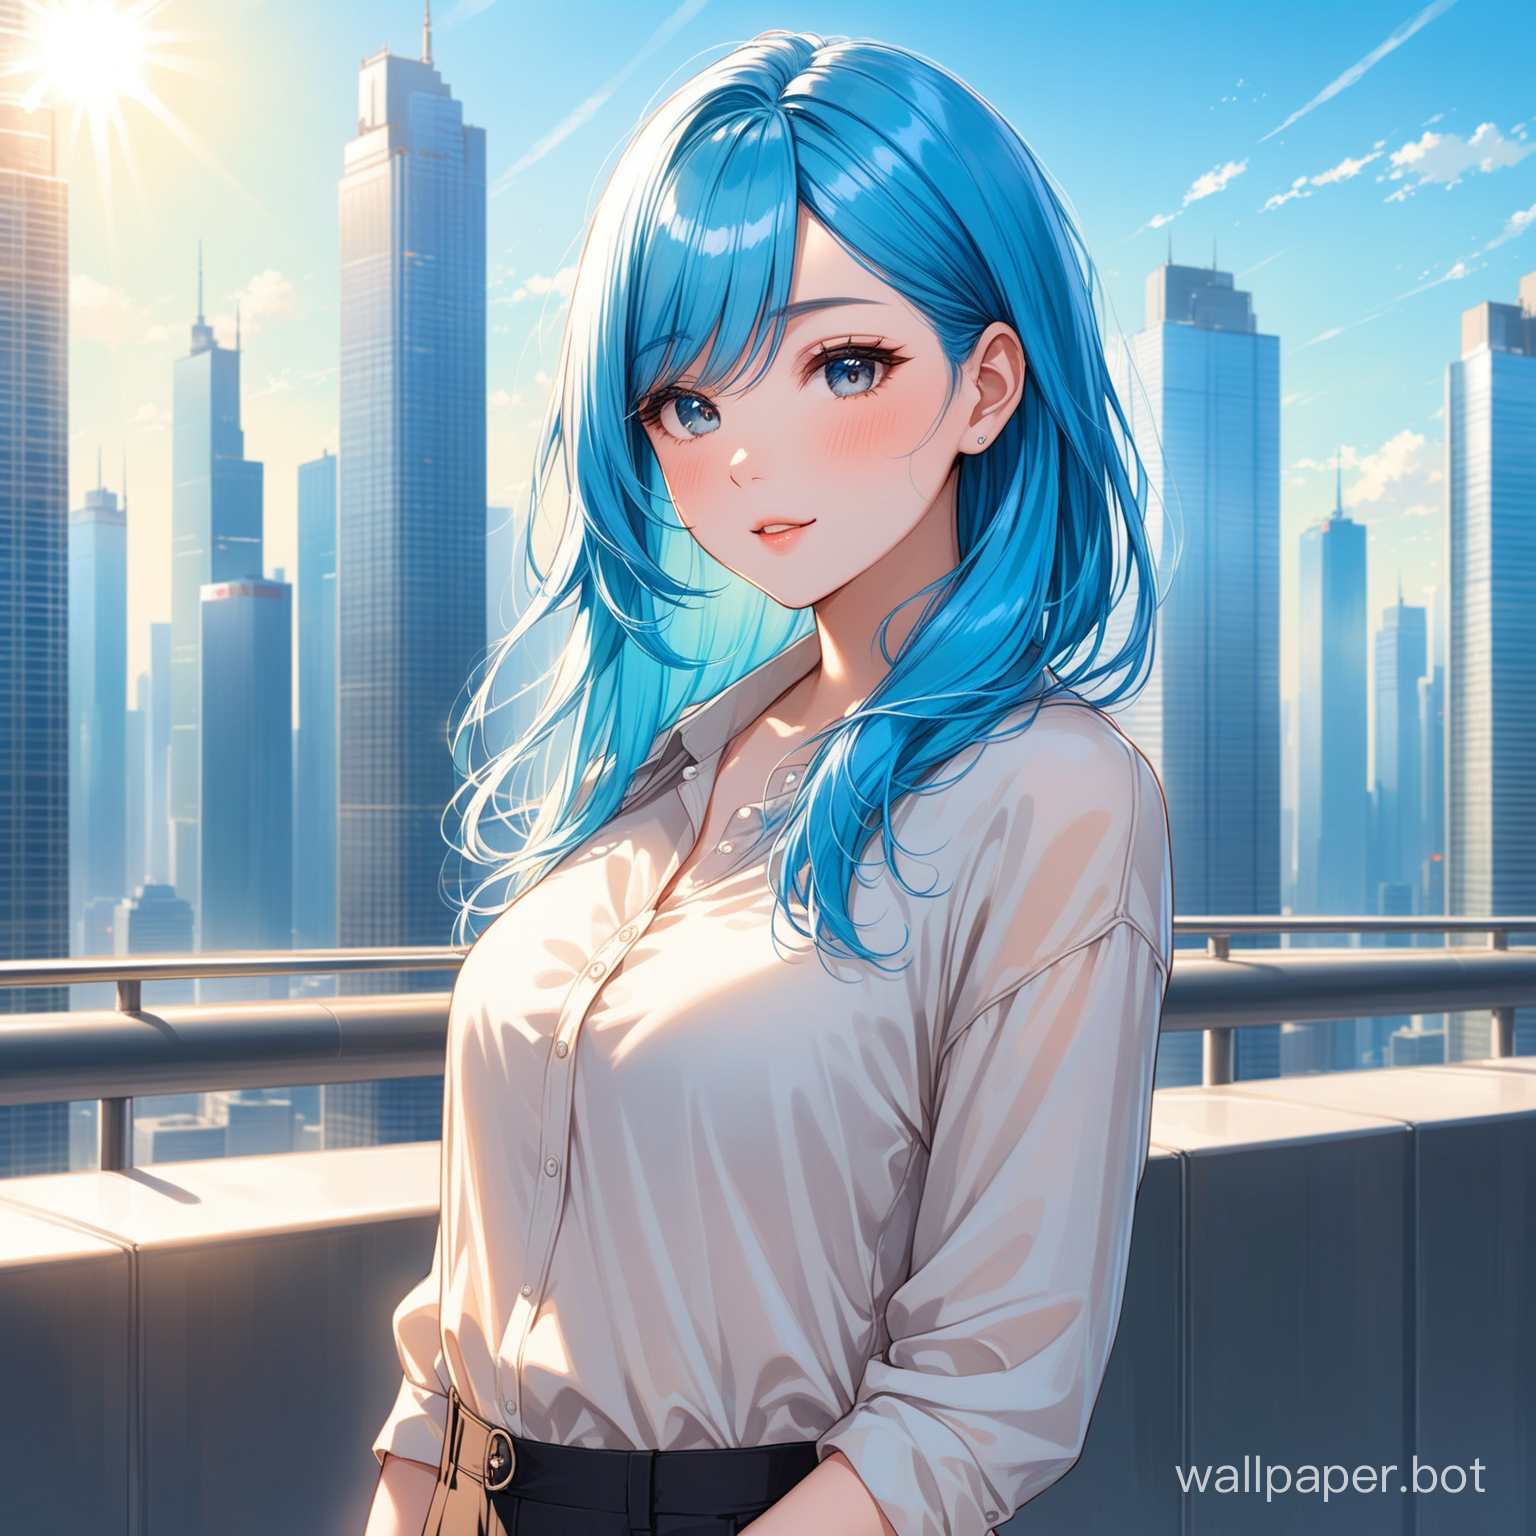 "A beautiful girl with blue hair,wearing a stylish outfit, standing  in front of a cityscape background  with skyscrapers and modern  buildings. The sky is clear and the  sun shines brightly, creating a  stunning view."